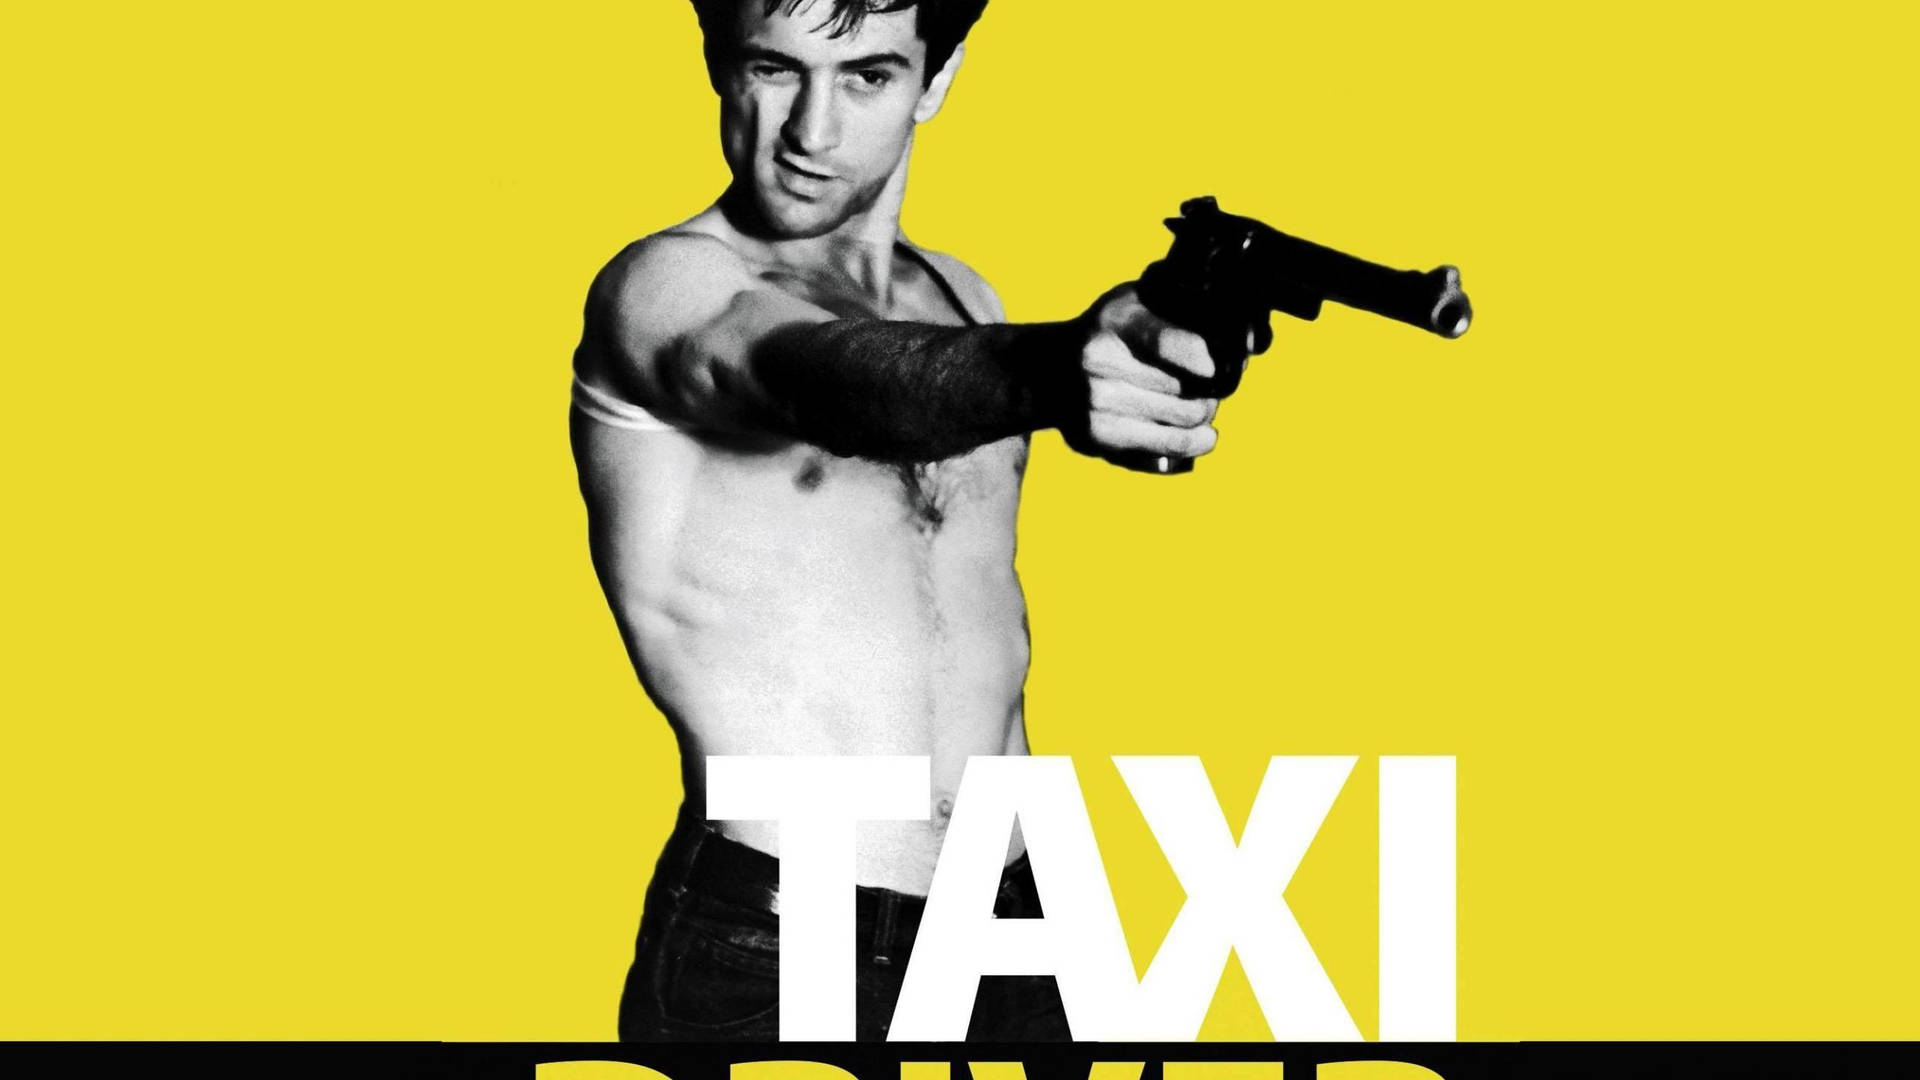 Taxi Driver Hollywood Film Photoshop Wallpaper